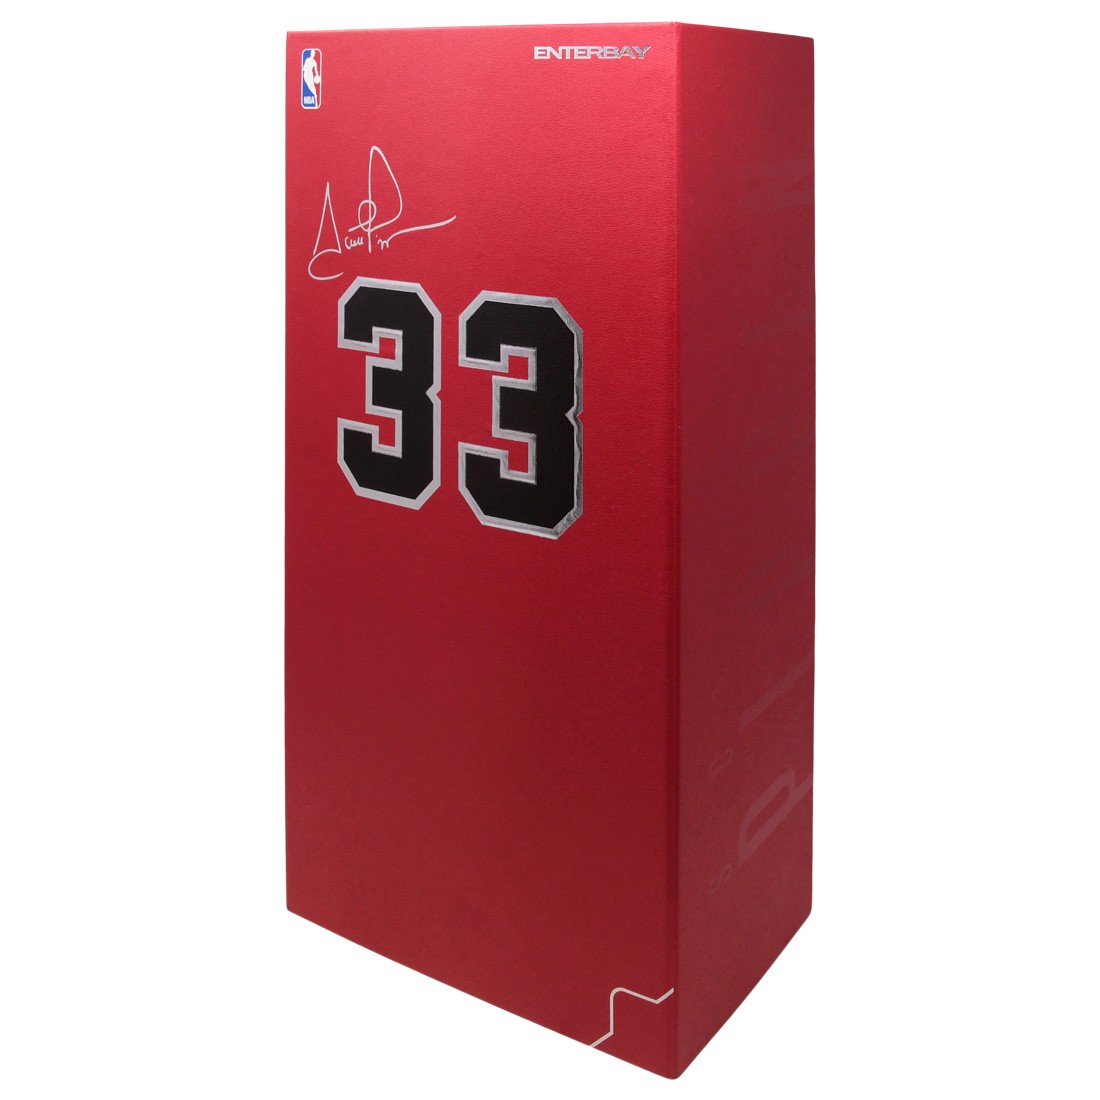 1/6 Real Masterpiece: NBA Collection – Scottie Pippen Action